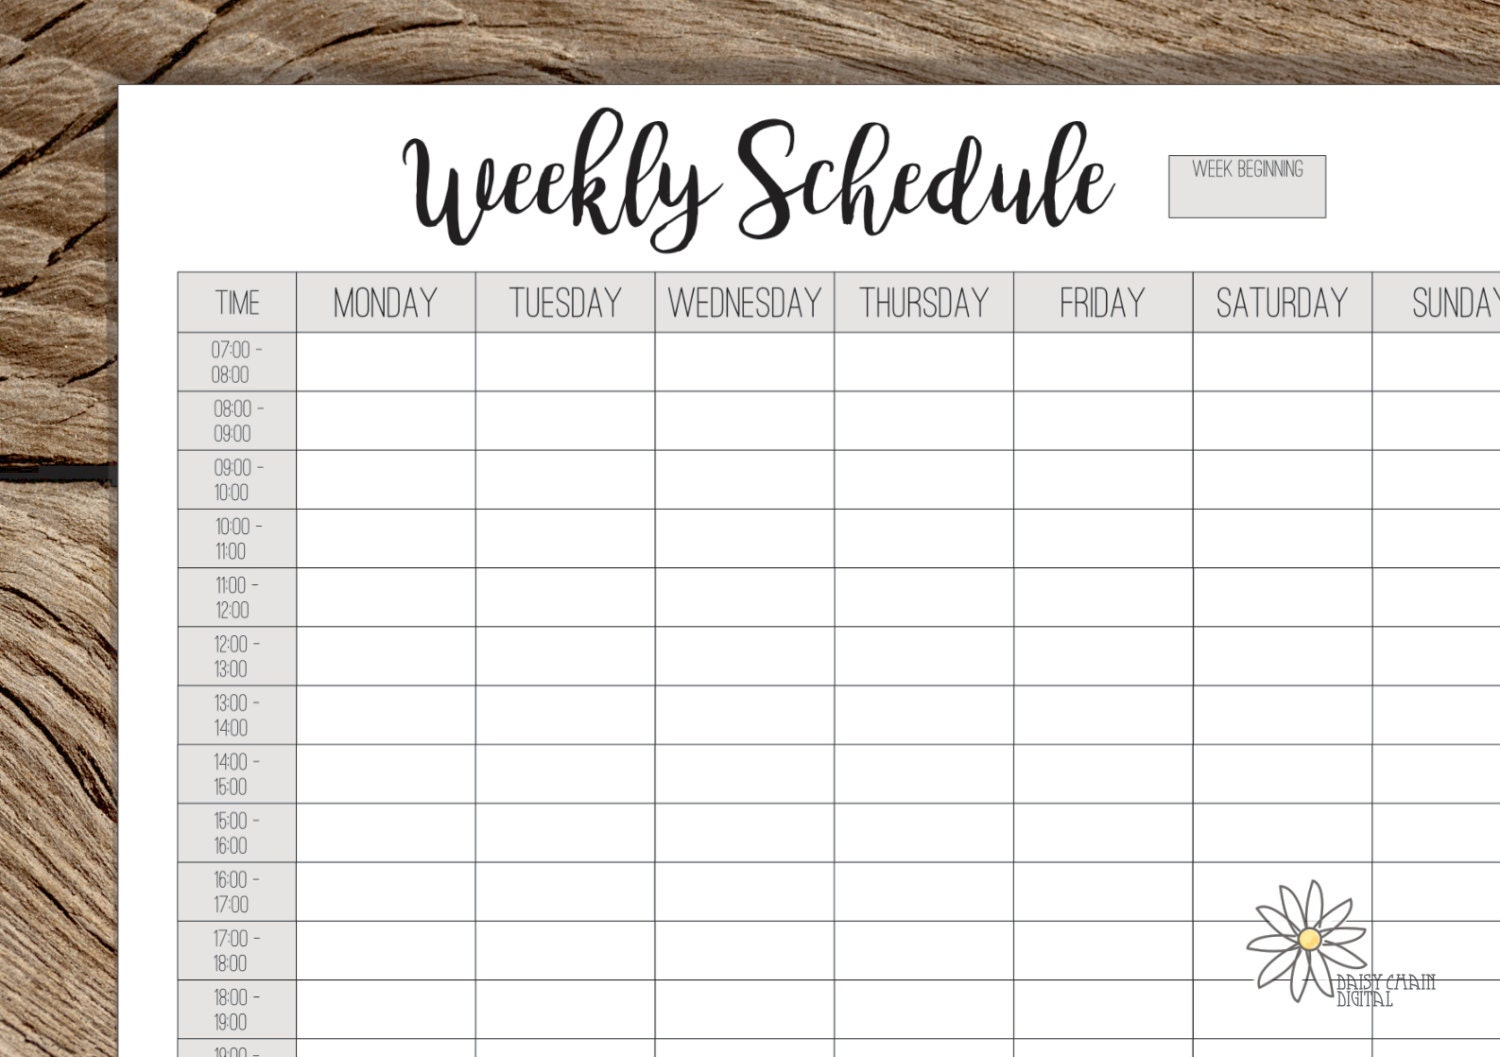 printable weekly schedule weekly timetable a4 and us etsy 2